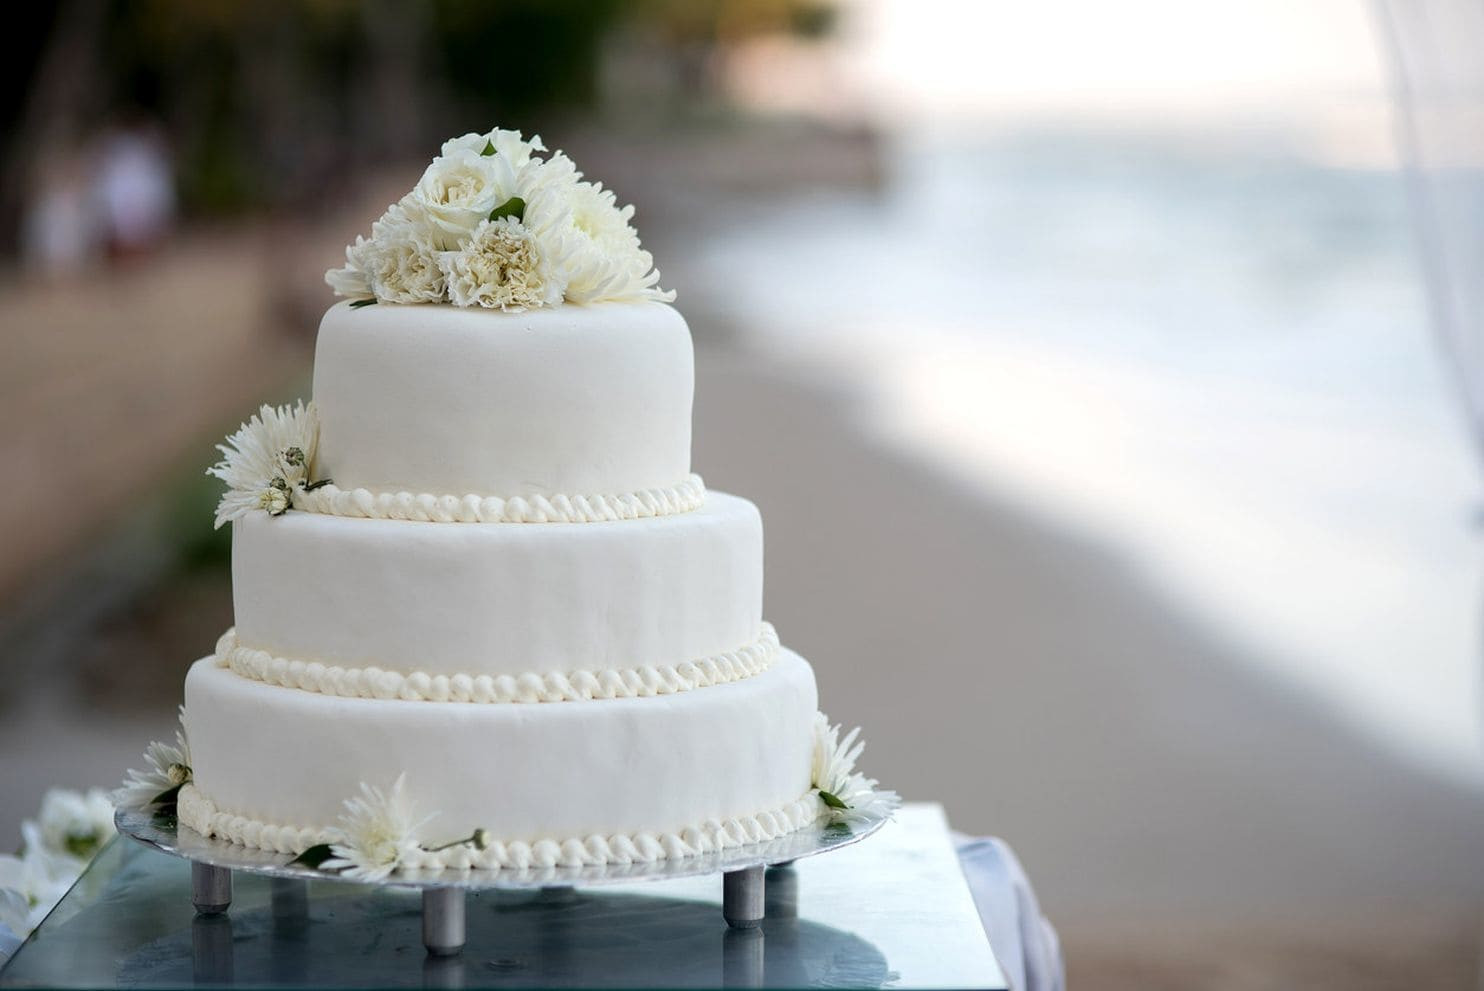 Wedding Cake Pictures
 A wedding cake is an ‘artistic expression’ that a baker